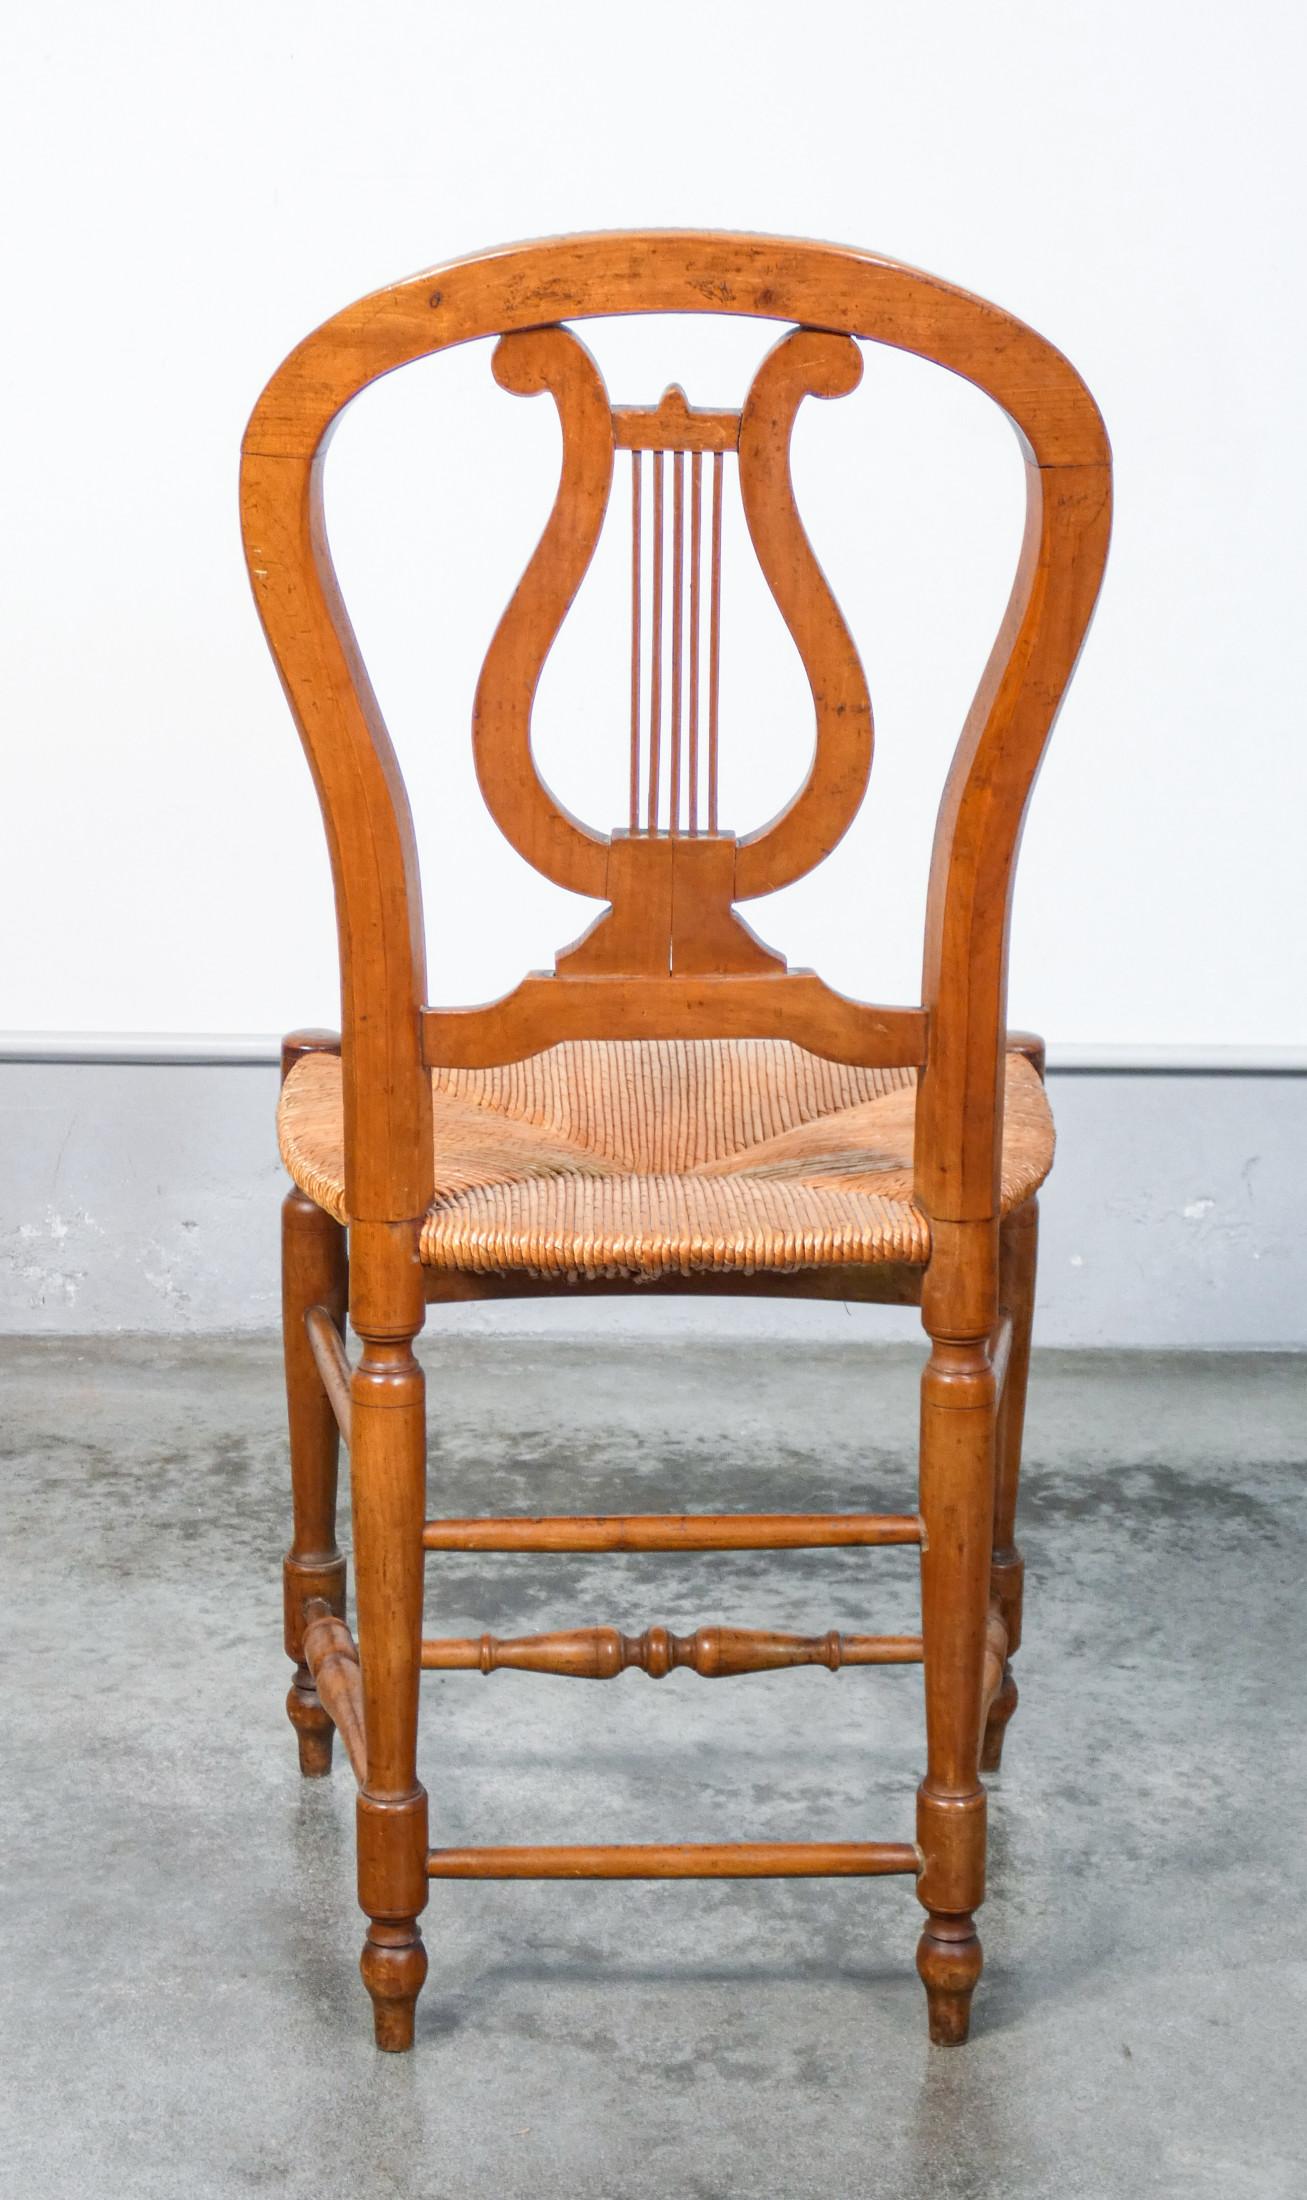 Pair of Cherry Wood Chairs with Lyre-Shaped Back and Straw Seat, Early 20th For Sale 4